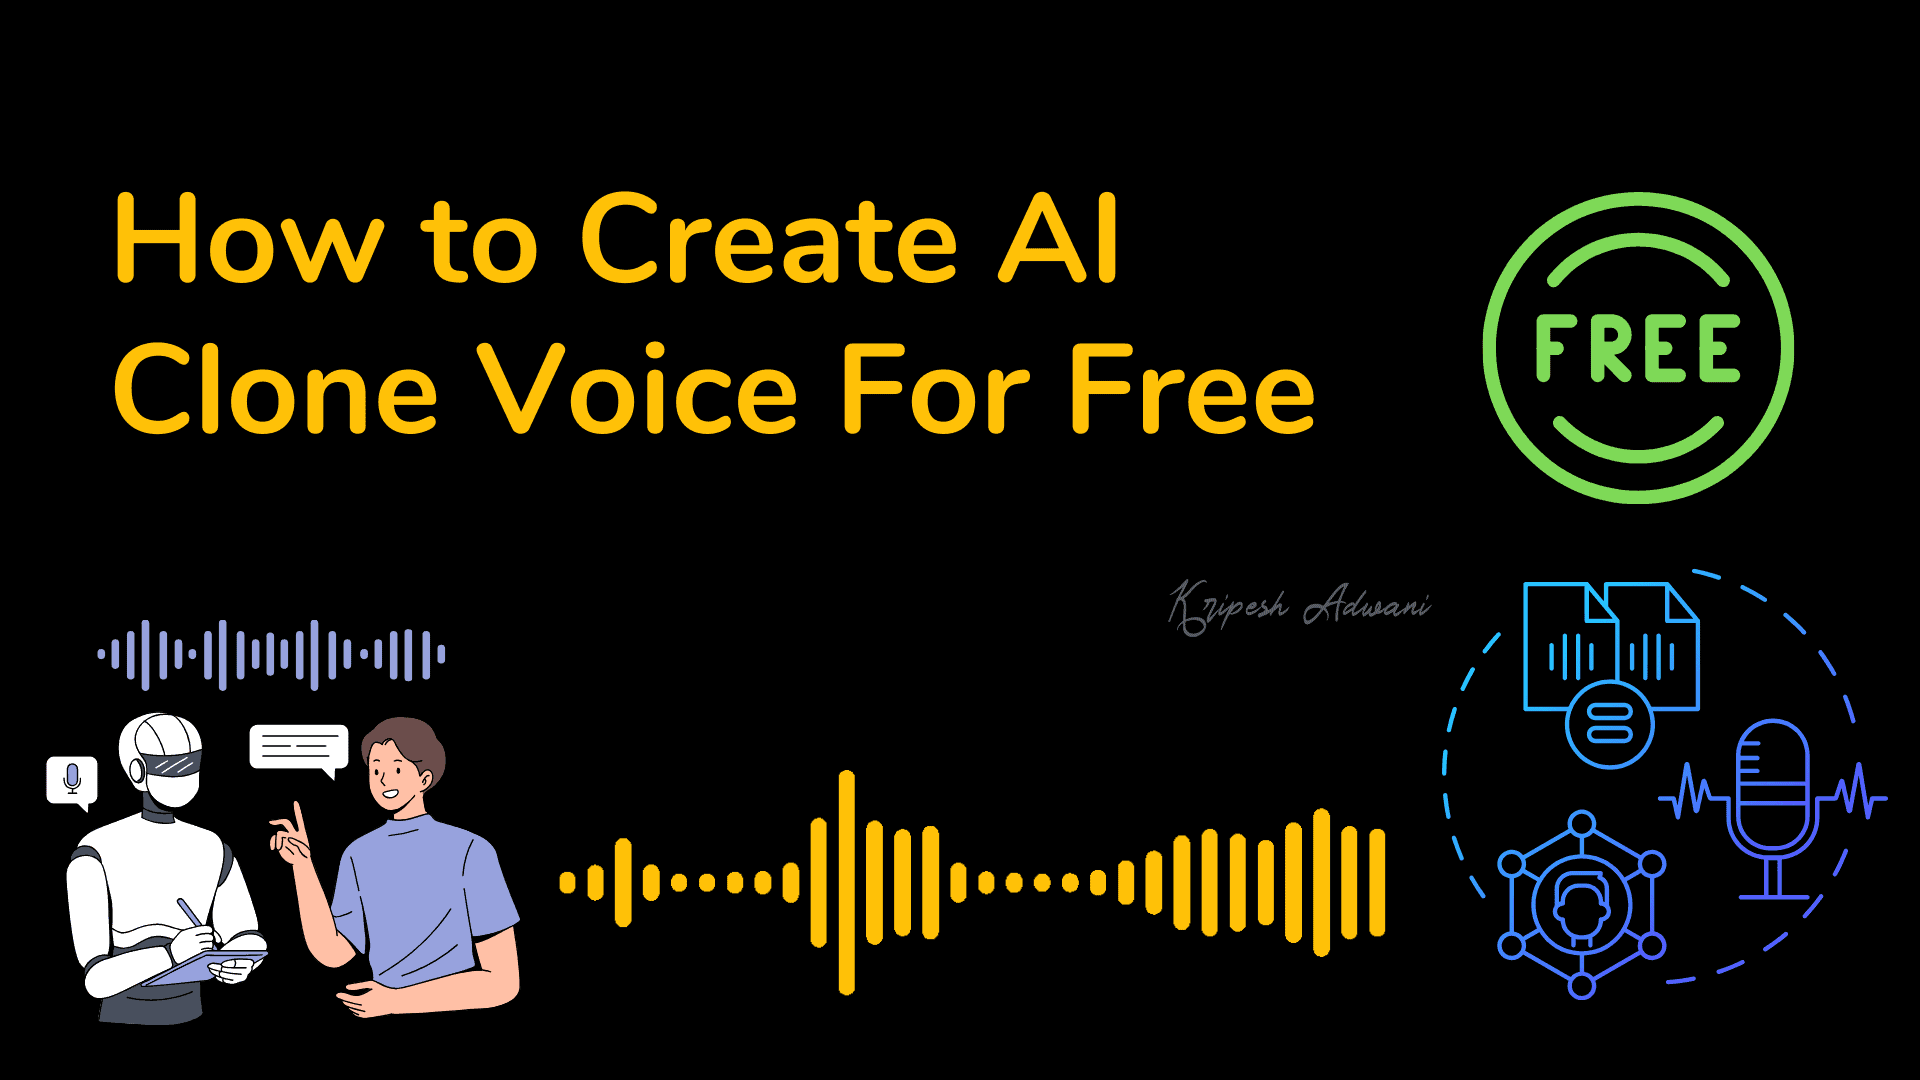 How to Create an AI Voice Clone for Free? Get Your Voice, AI-Powered